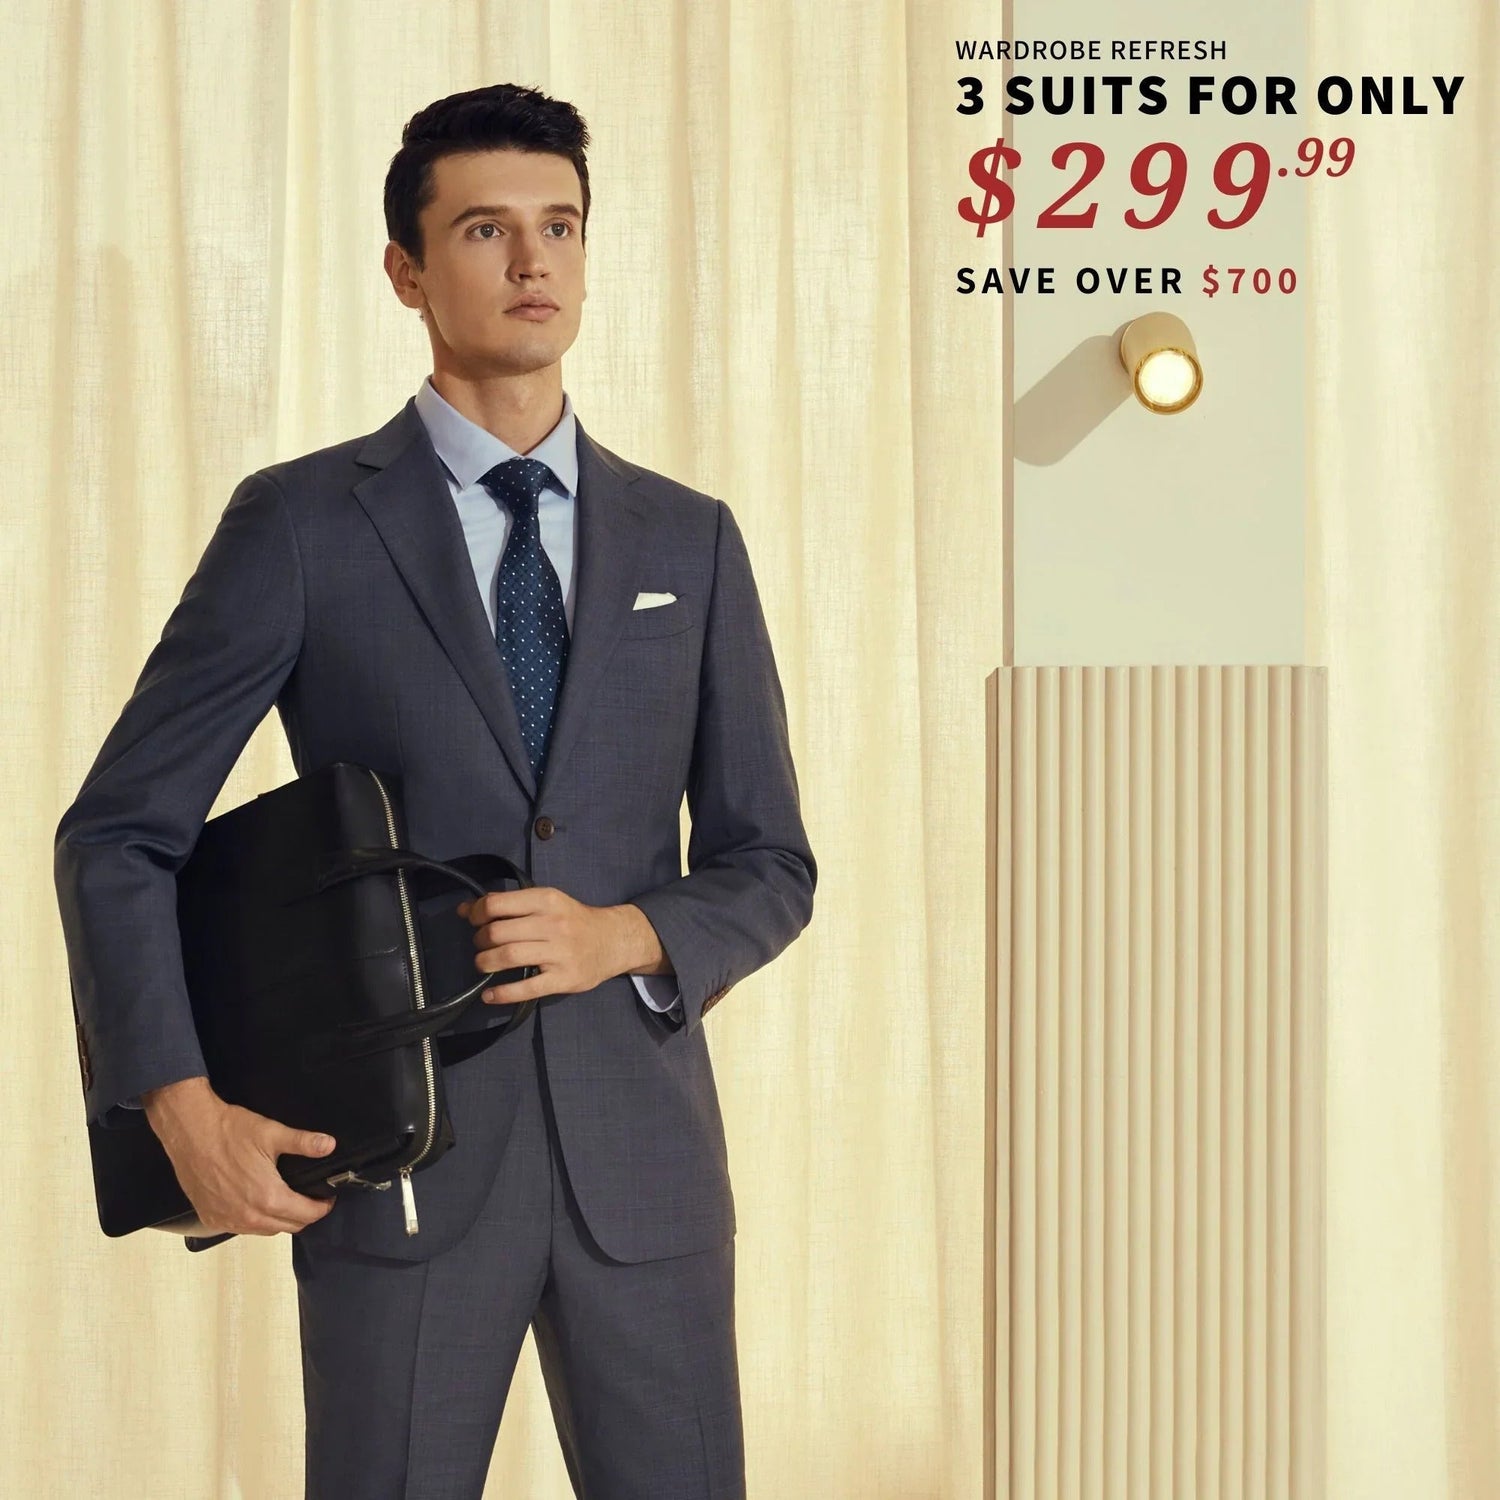 A man in a suit is holding a briefcase, his BYOB 3 Suits for $299, jacket size perfectly fitted but his pants size unhemmed.